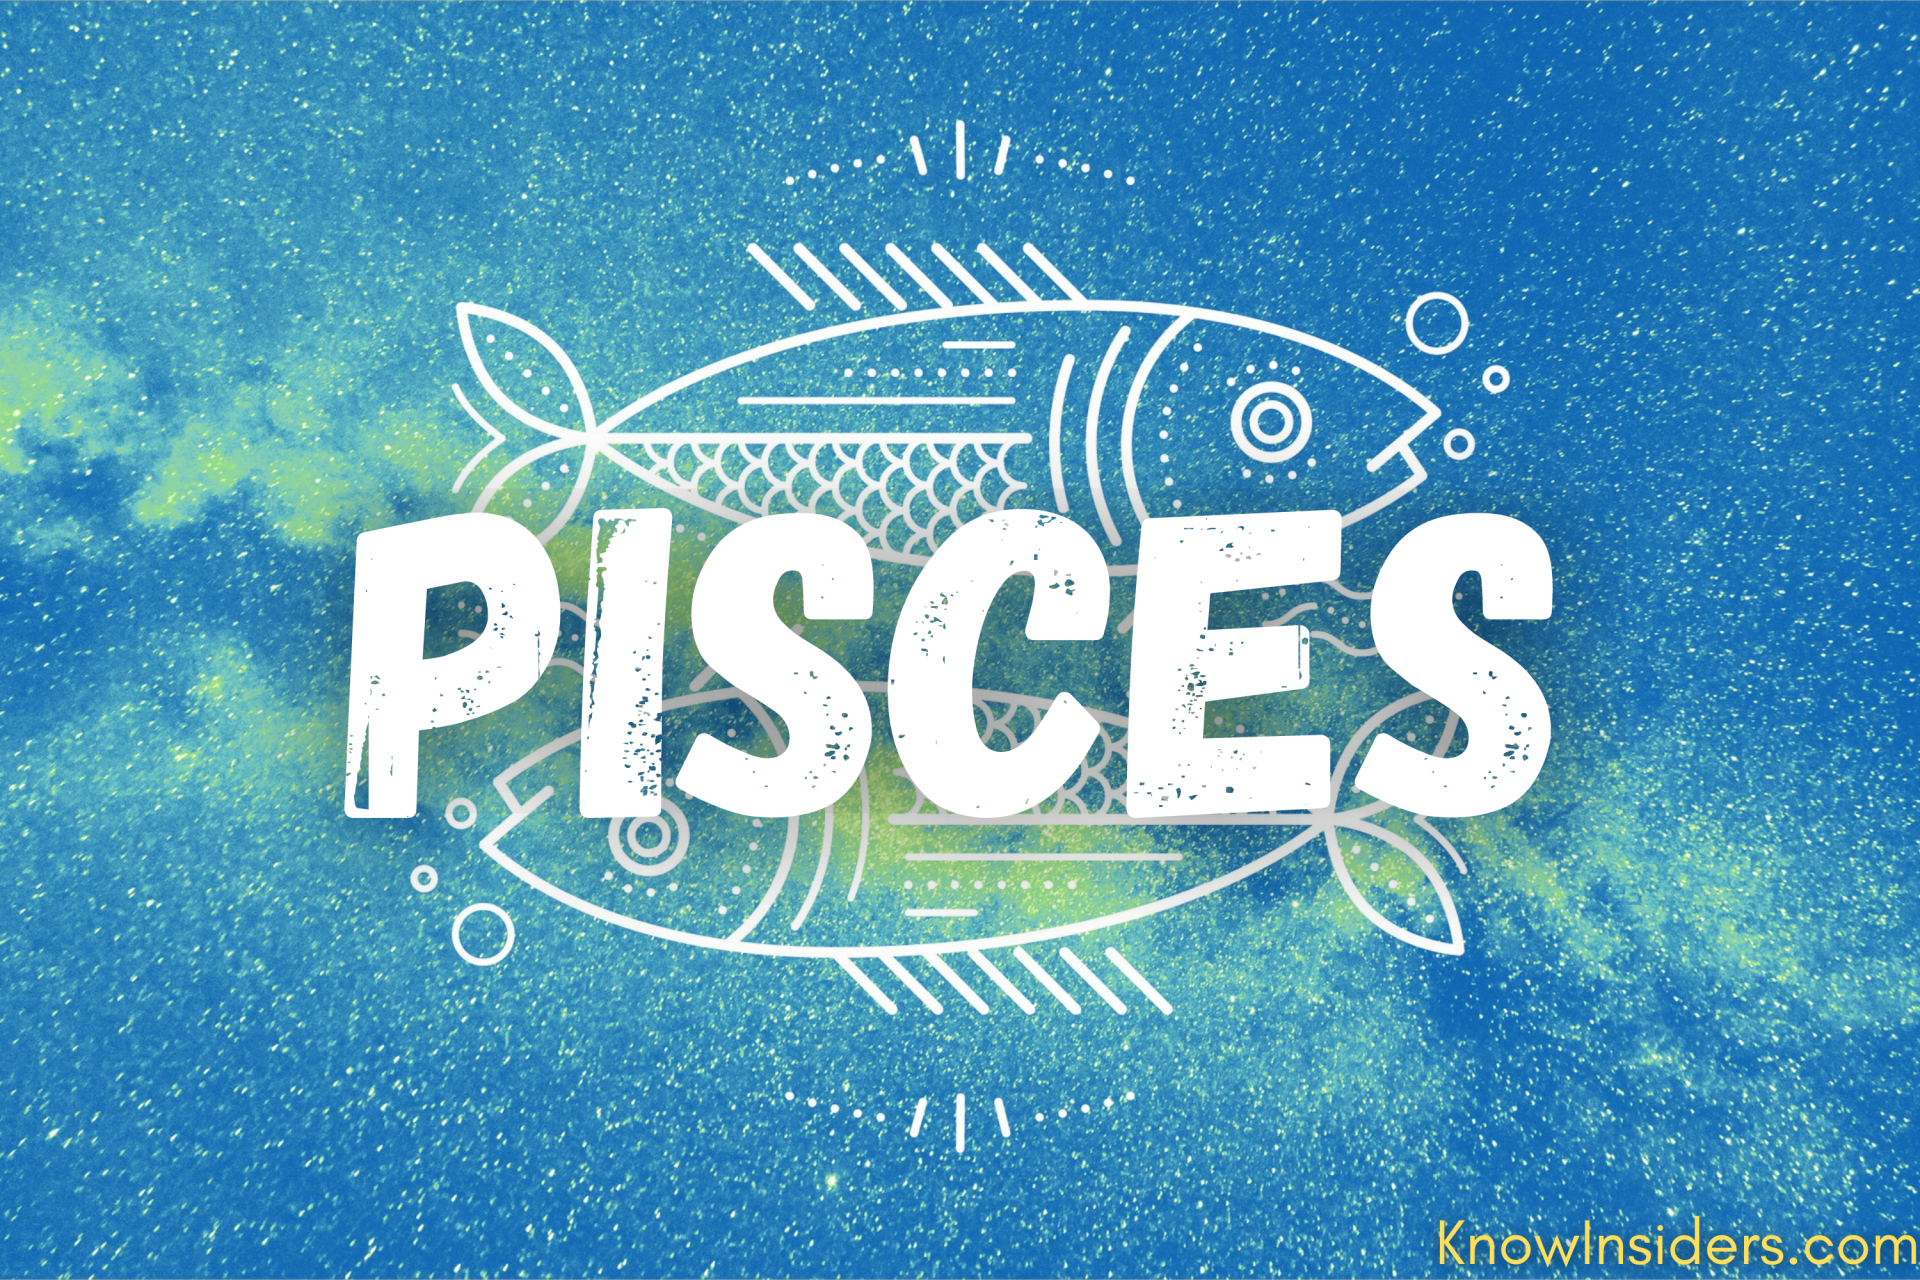 PISCES Horoscope September 2021 - Monthly Predictions for Love, Health, Career and Money